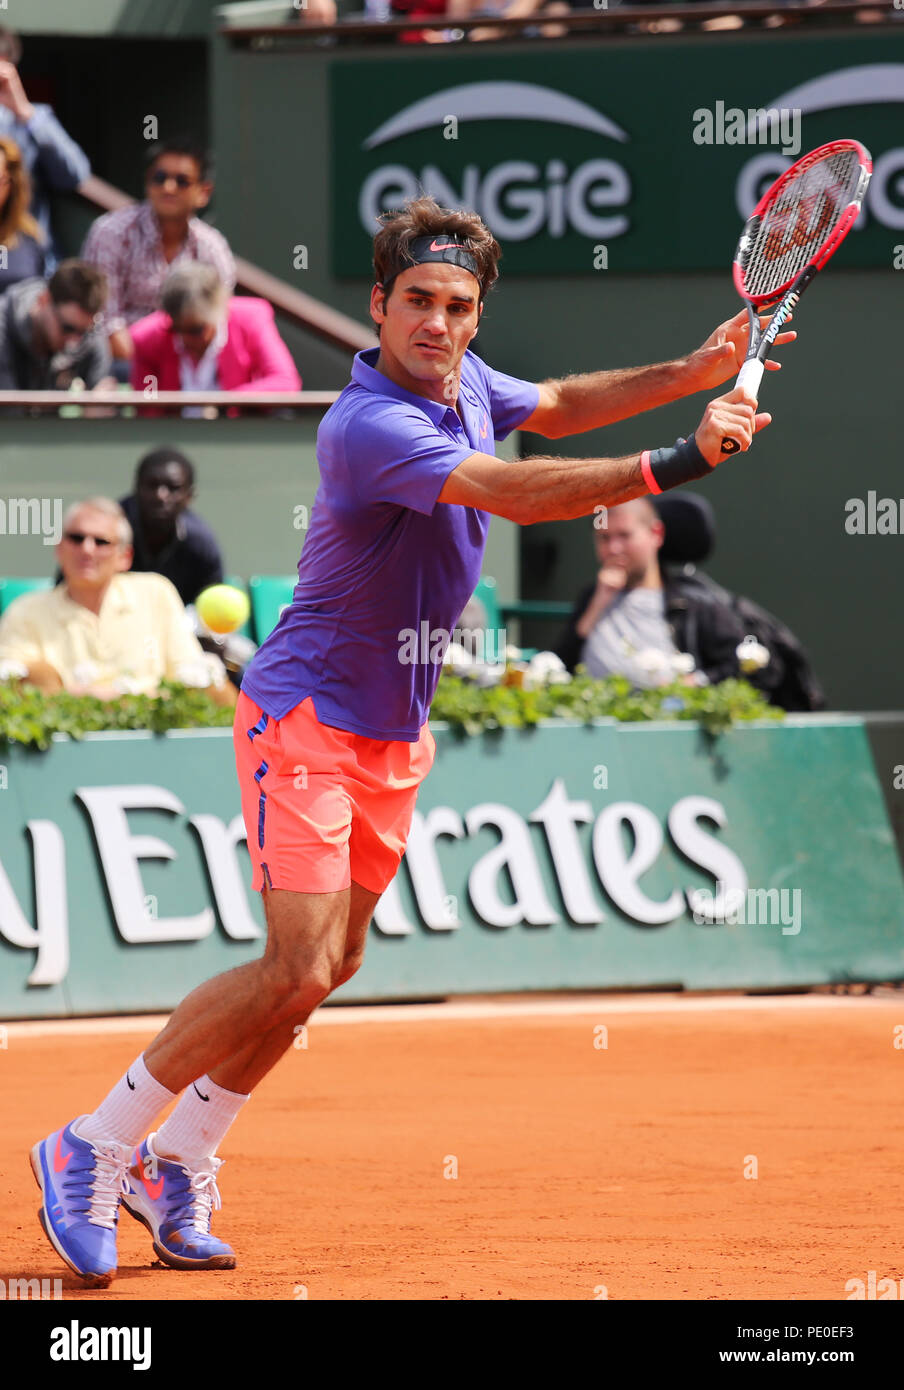 Seventeen times Grand Slam champion Roger Federer in action during his third round match at Roland Garros 2015 Stock Photo